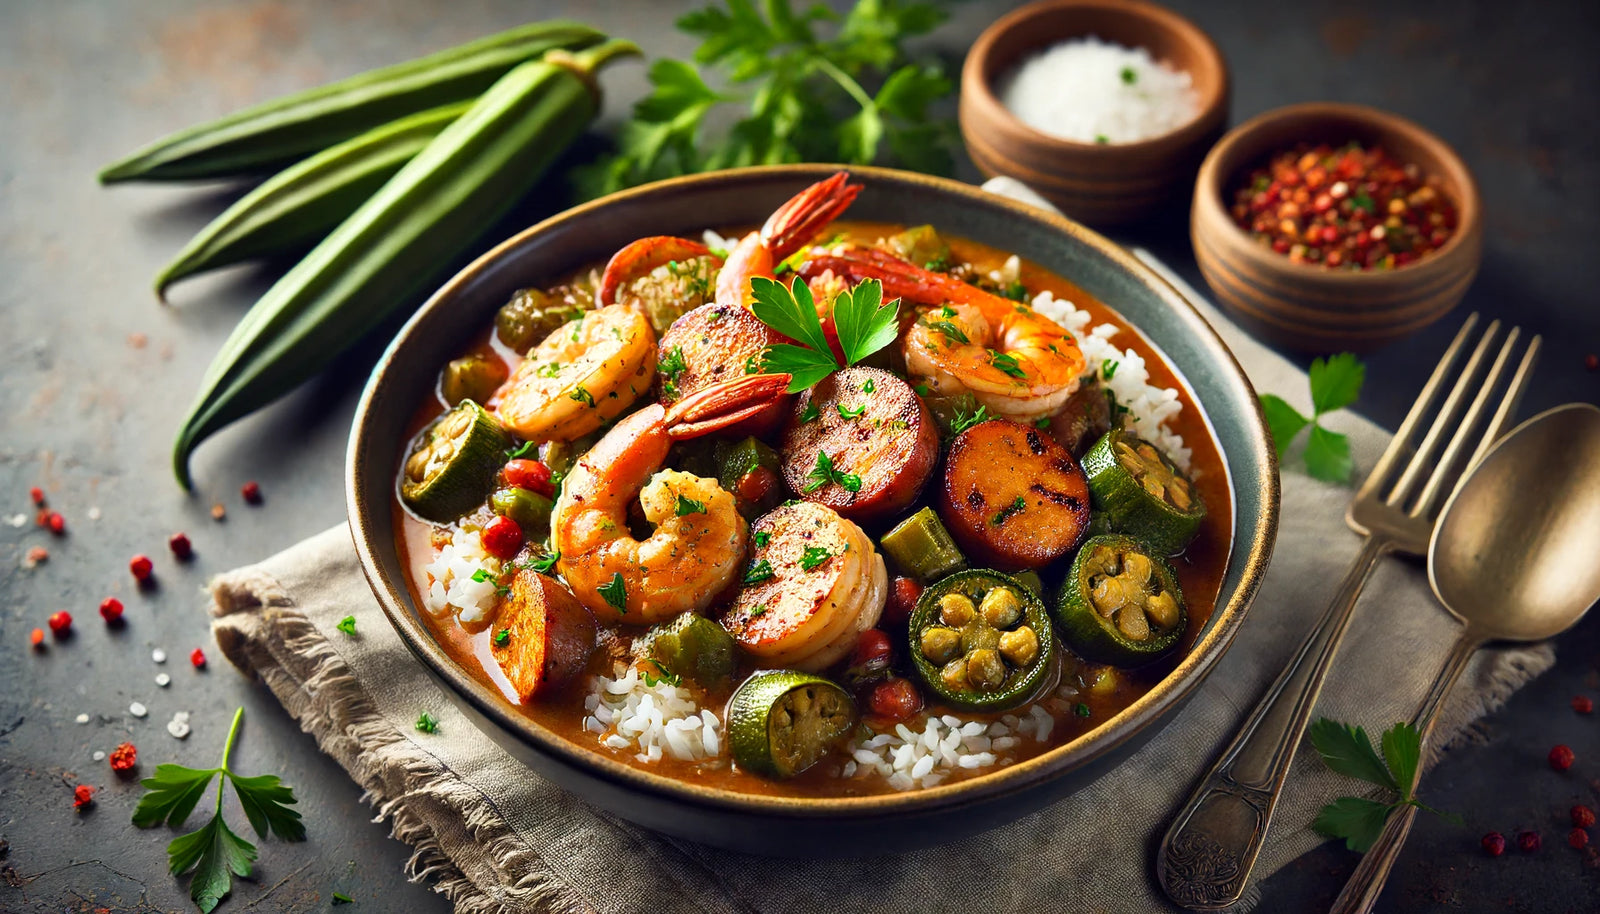 Ultimate Arteflame Grilled Gumbo